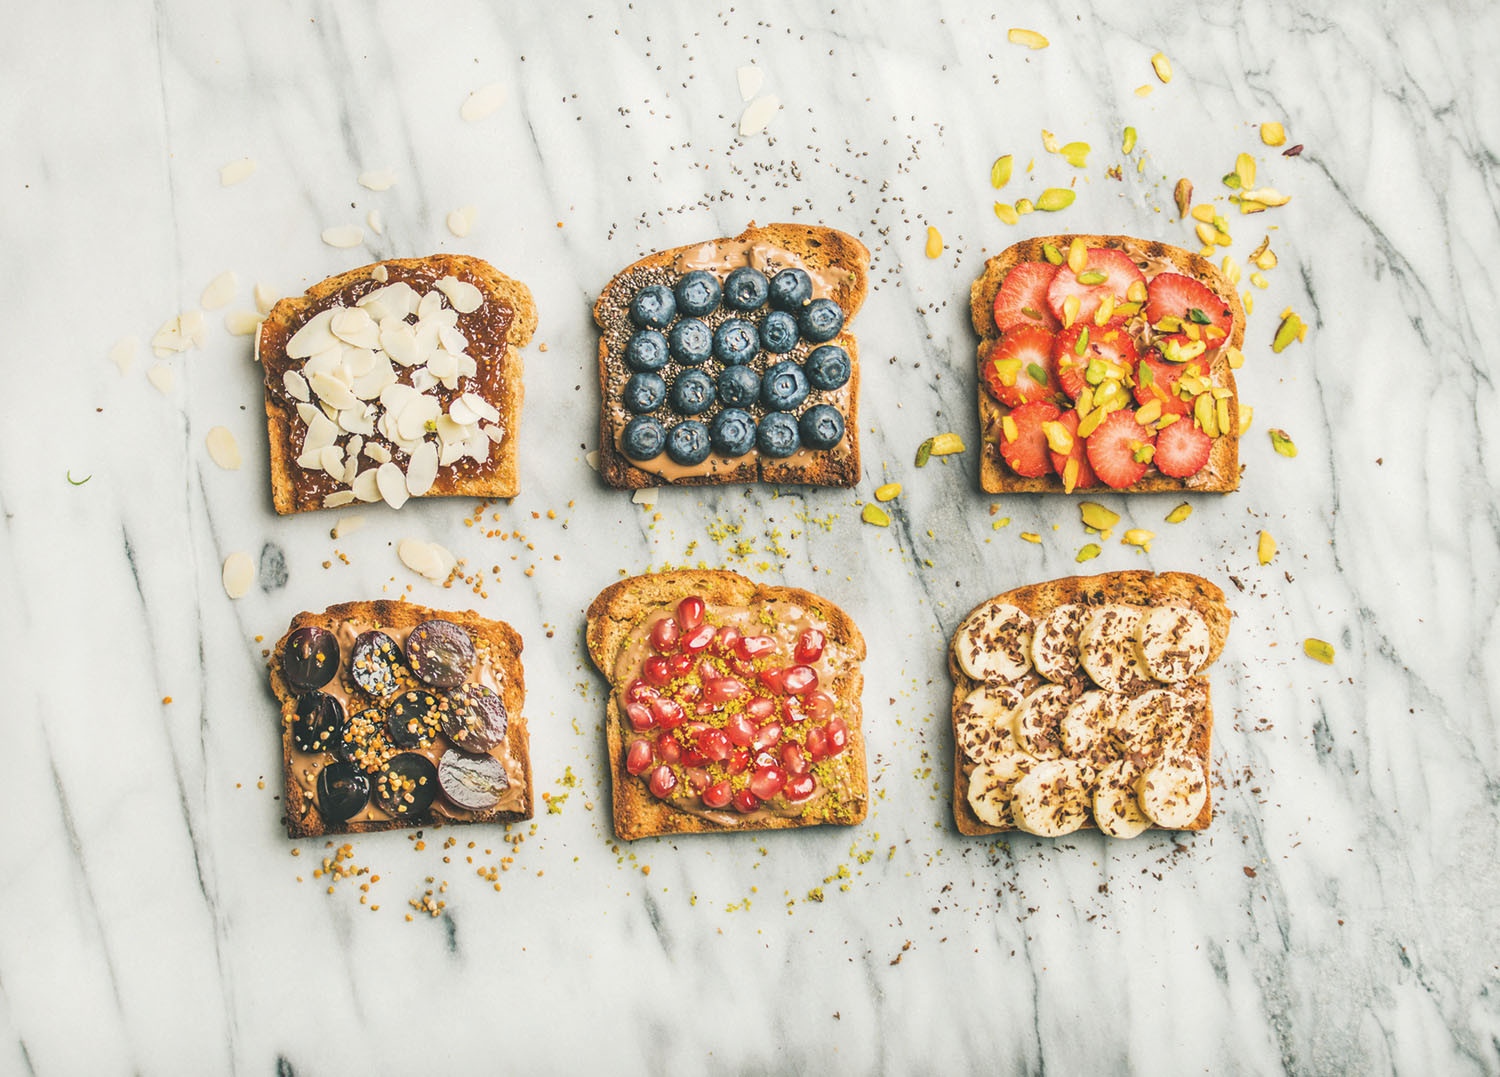 six slices of toast shown with a variety of nut butters and fruits on them